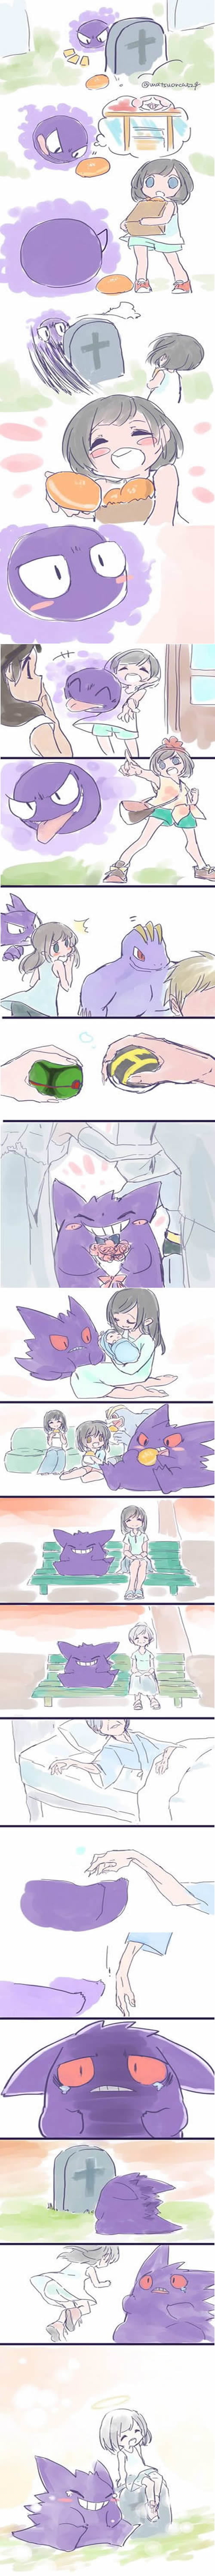 This Story About Gengar By The Grave Will Give You All The Feels (By matsuorca524)